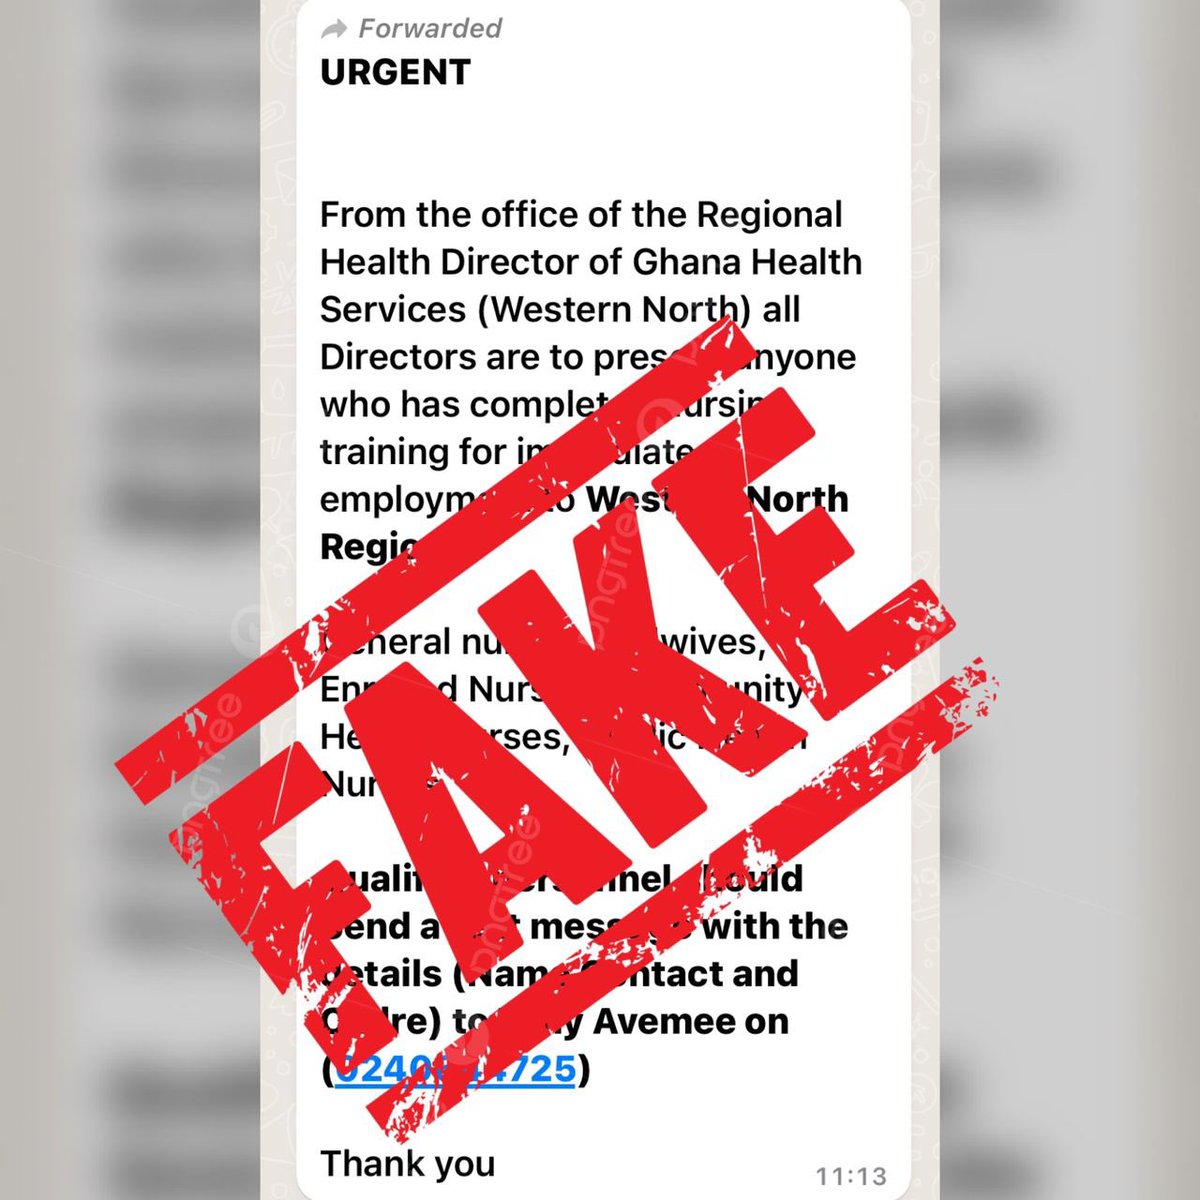 ‼️ Please keep in mind that this is a fake post. Western North Regional Health Directorate is NOT recruiting nurses of any cadre at the moment. It's important to verify the authenticity of job postings through official GHS channels to avoid misinformation or scams.‼️